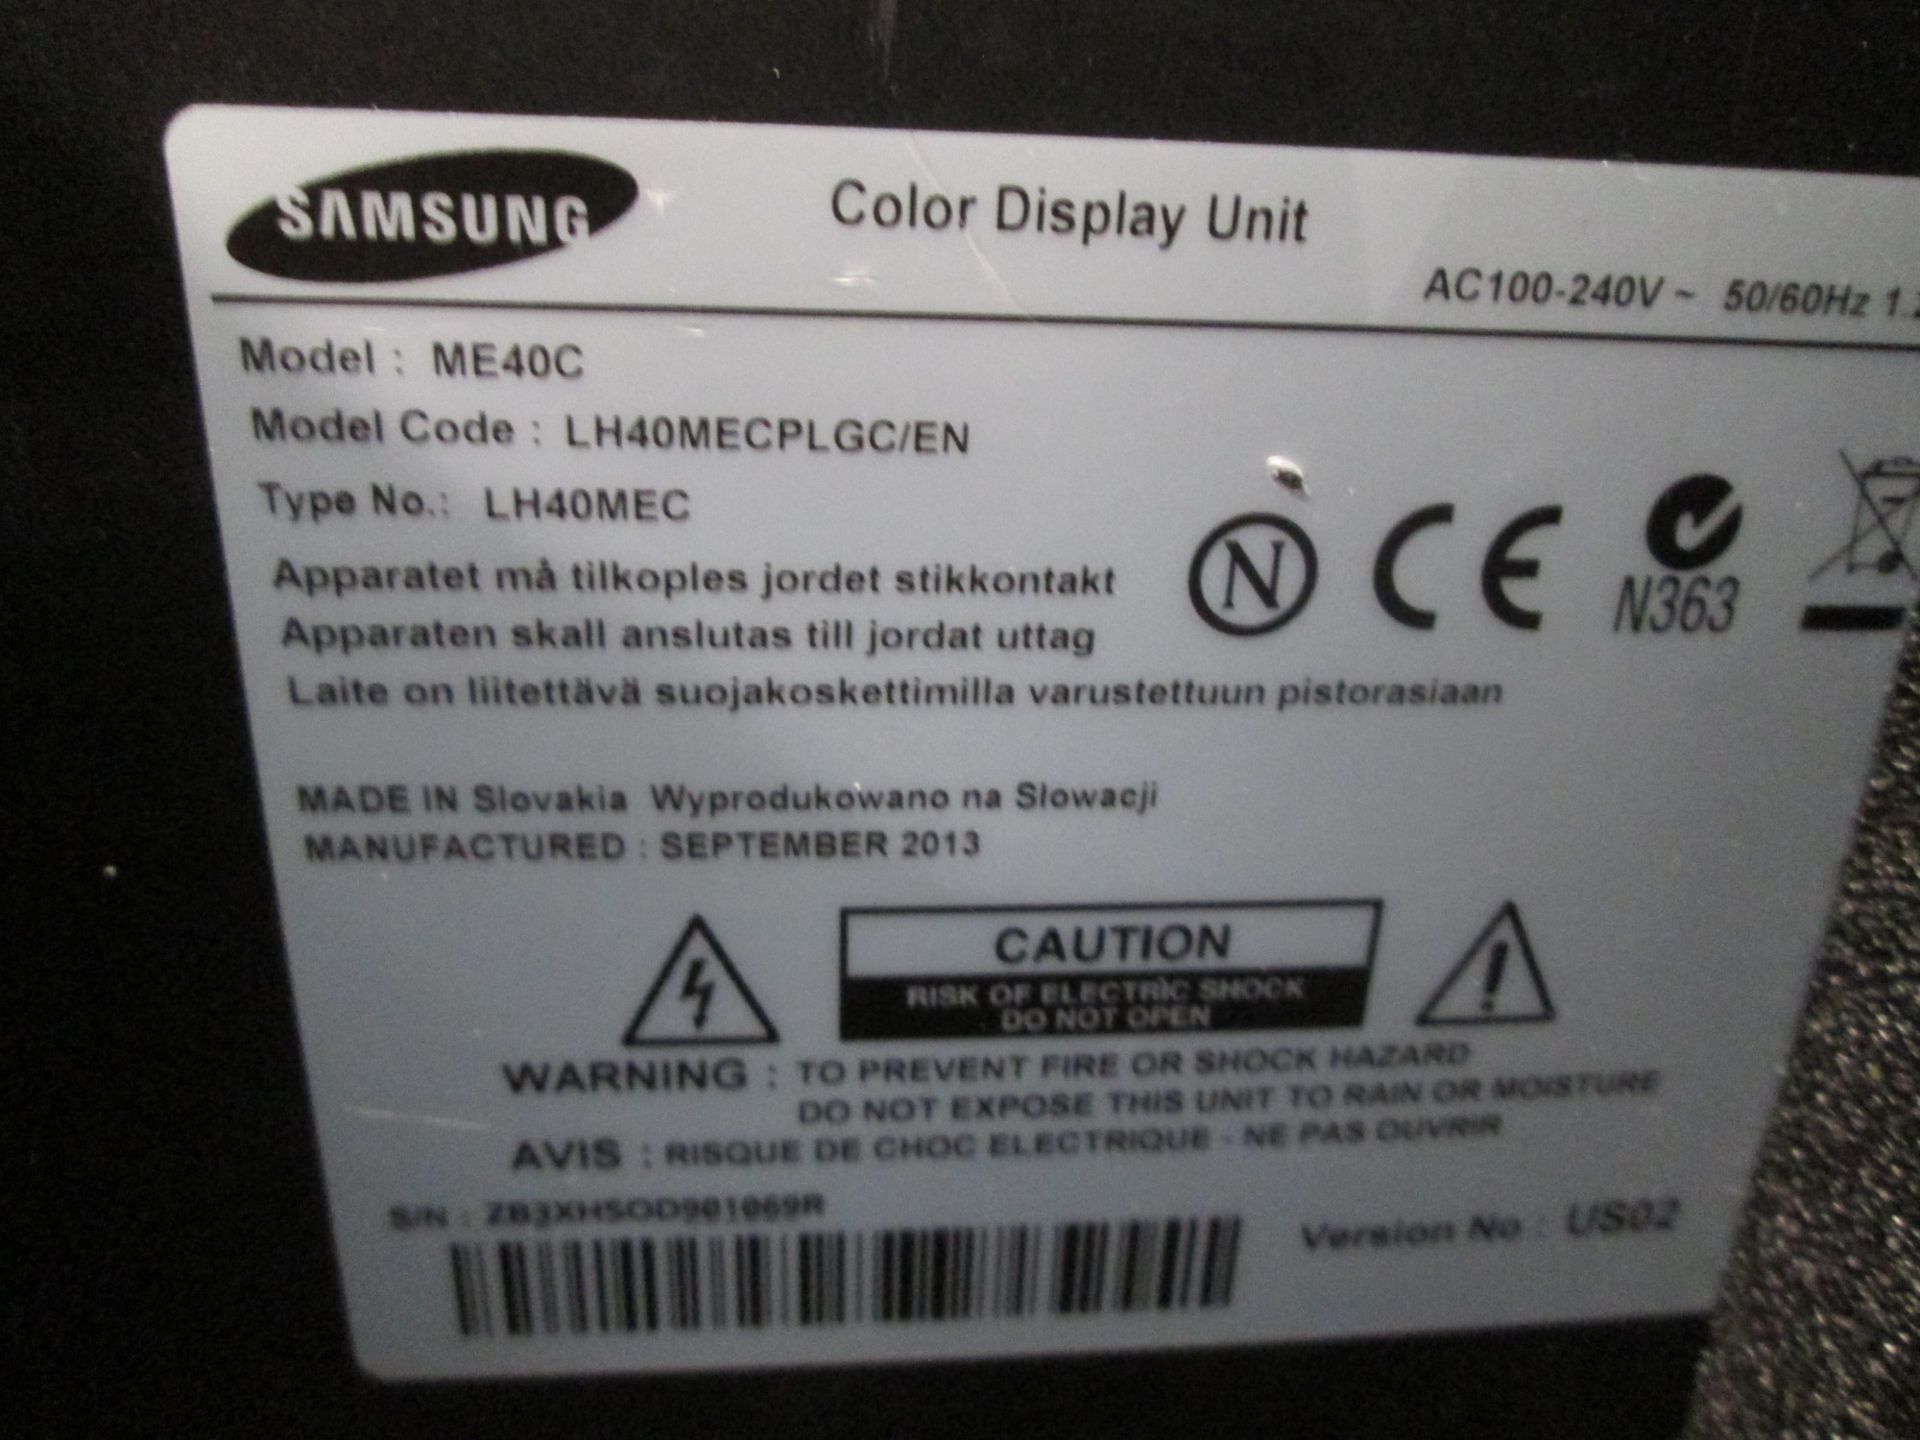 Samsung ME40C 40" Colour Display Monitor, With backplate, remote and power supply, In flight case. - Image 4 of 4